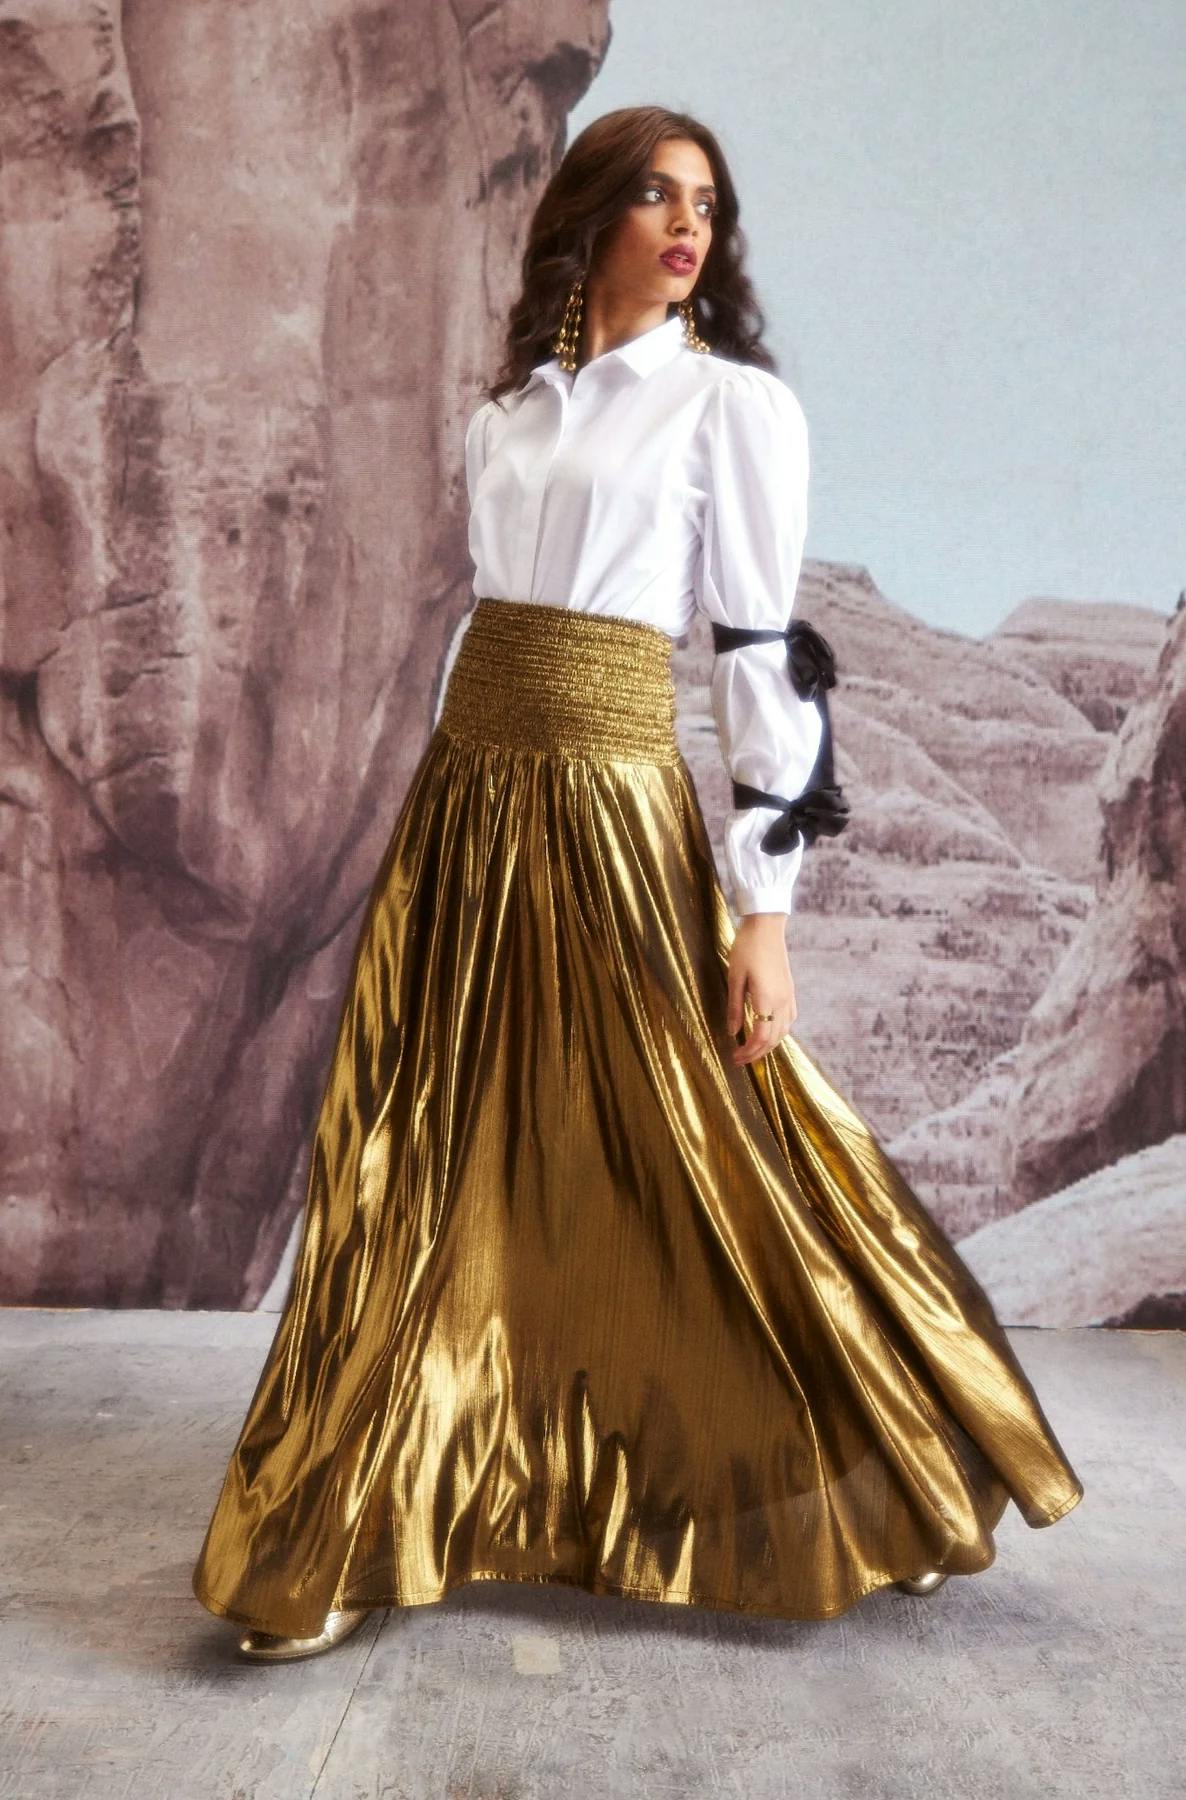 FIT & FLARE GOLD SKIRT, a product by Dash & Dot